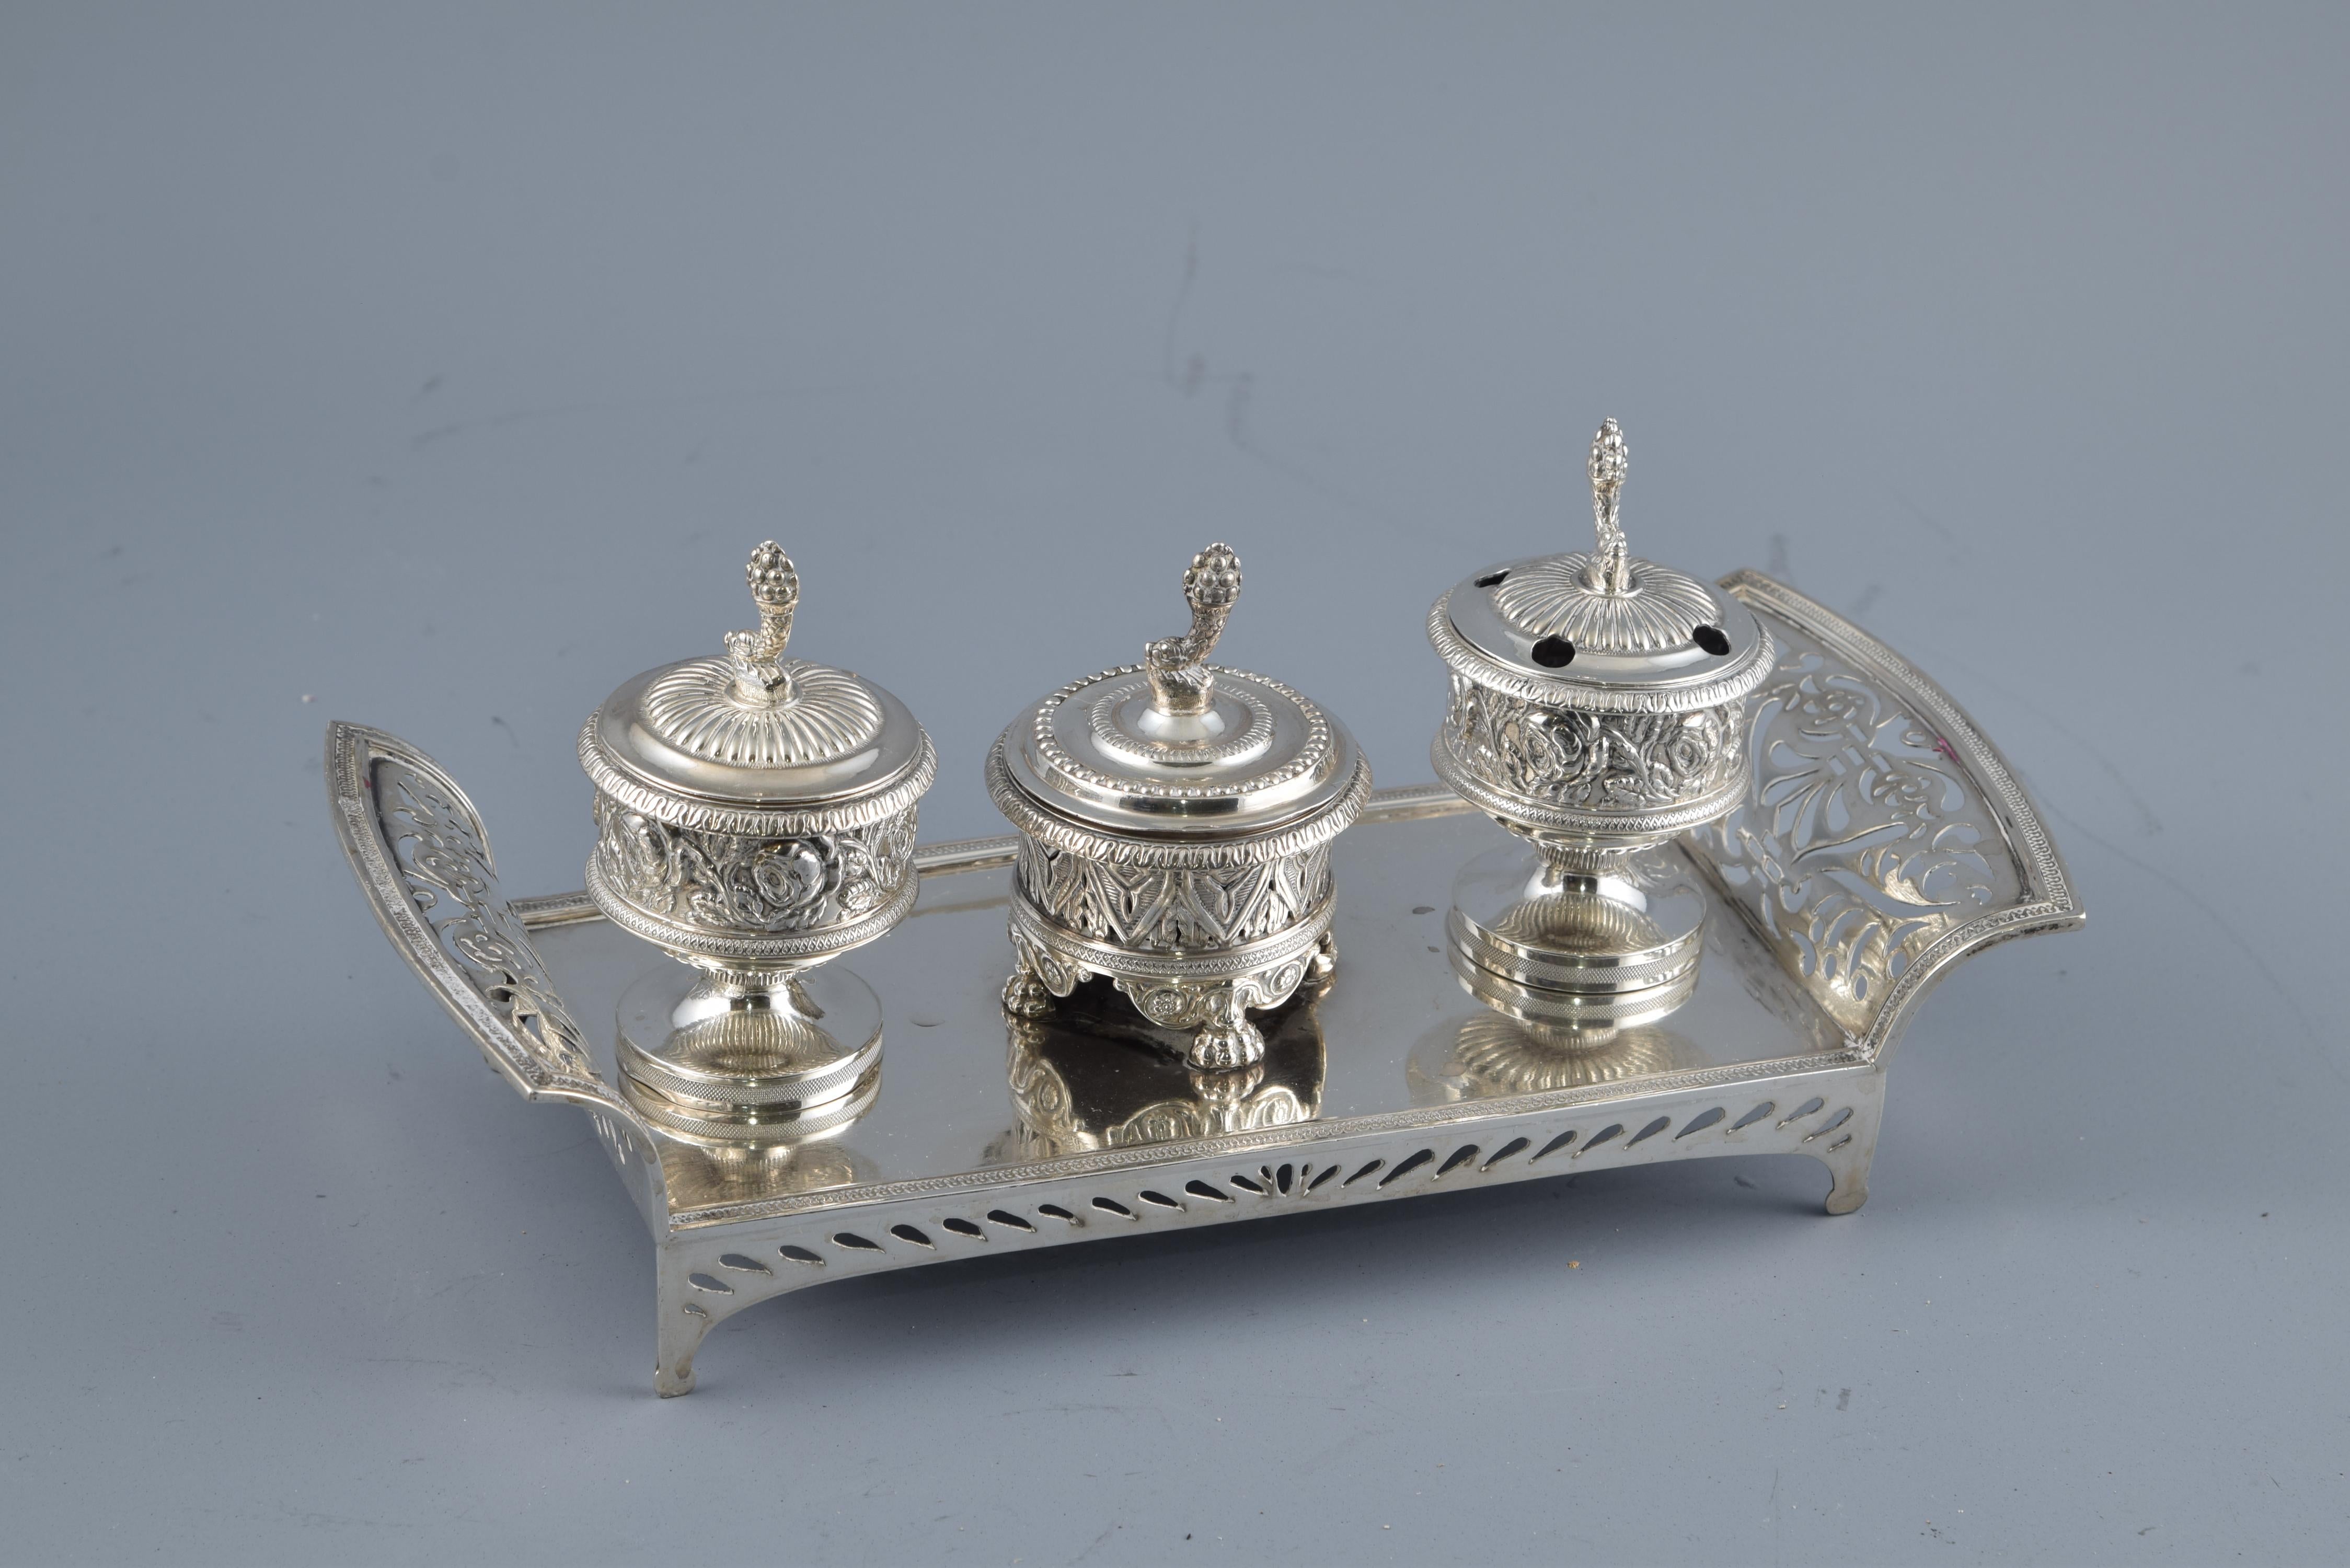 Scribe with three inkwells. Silver. Real Martínez silver factory, Madrid, 1845.
With contrast marks.
Notary of silver in its color composed of a rectangular tray with raised and openwork sides and openwork decoration on the longer sides